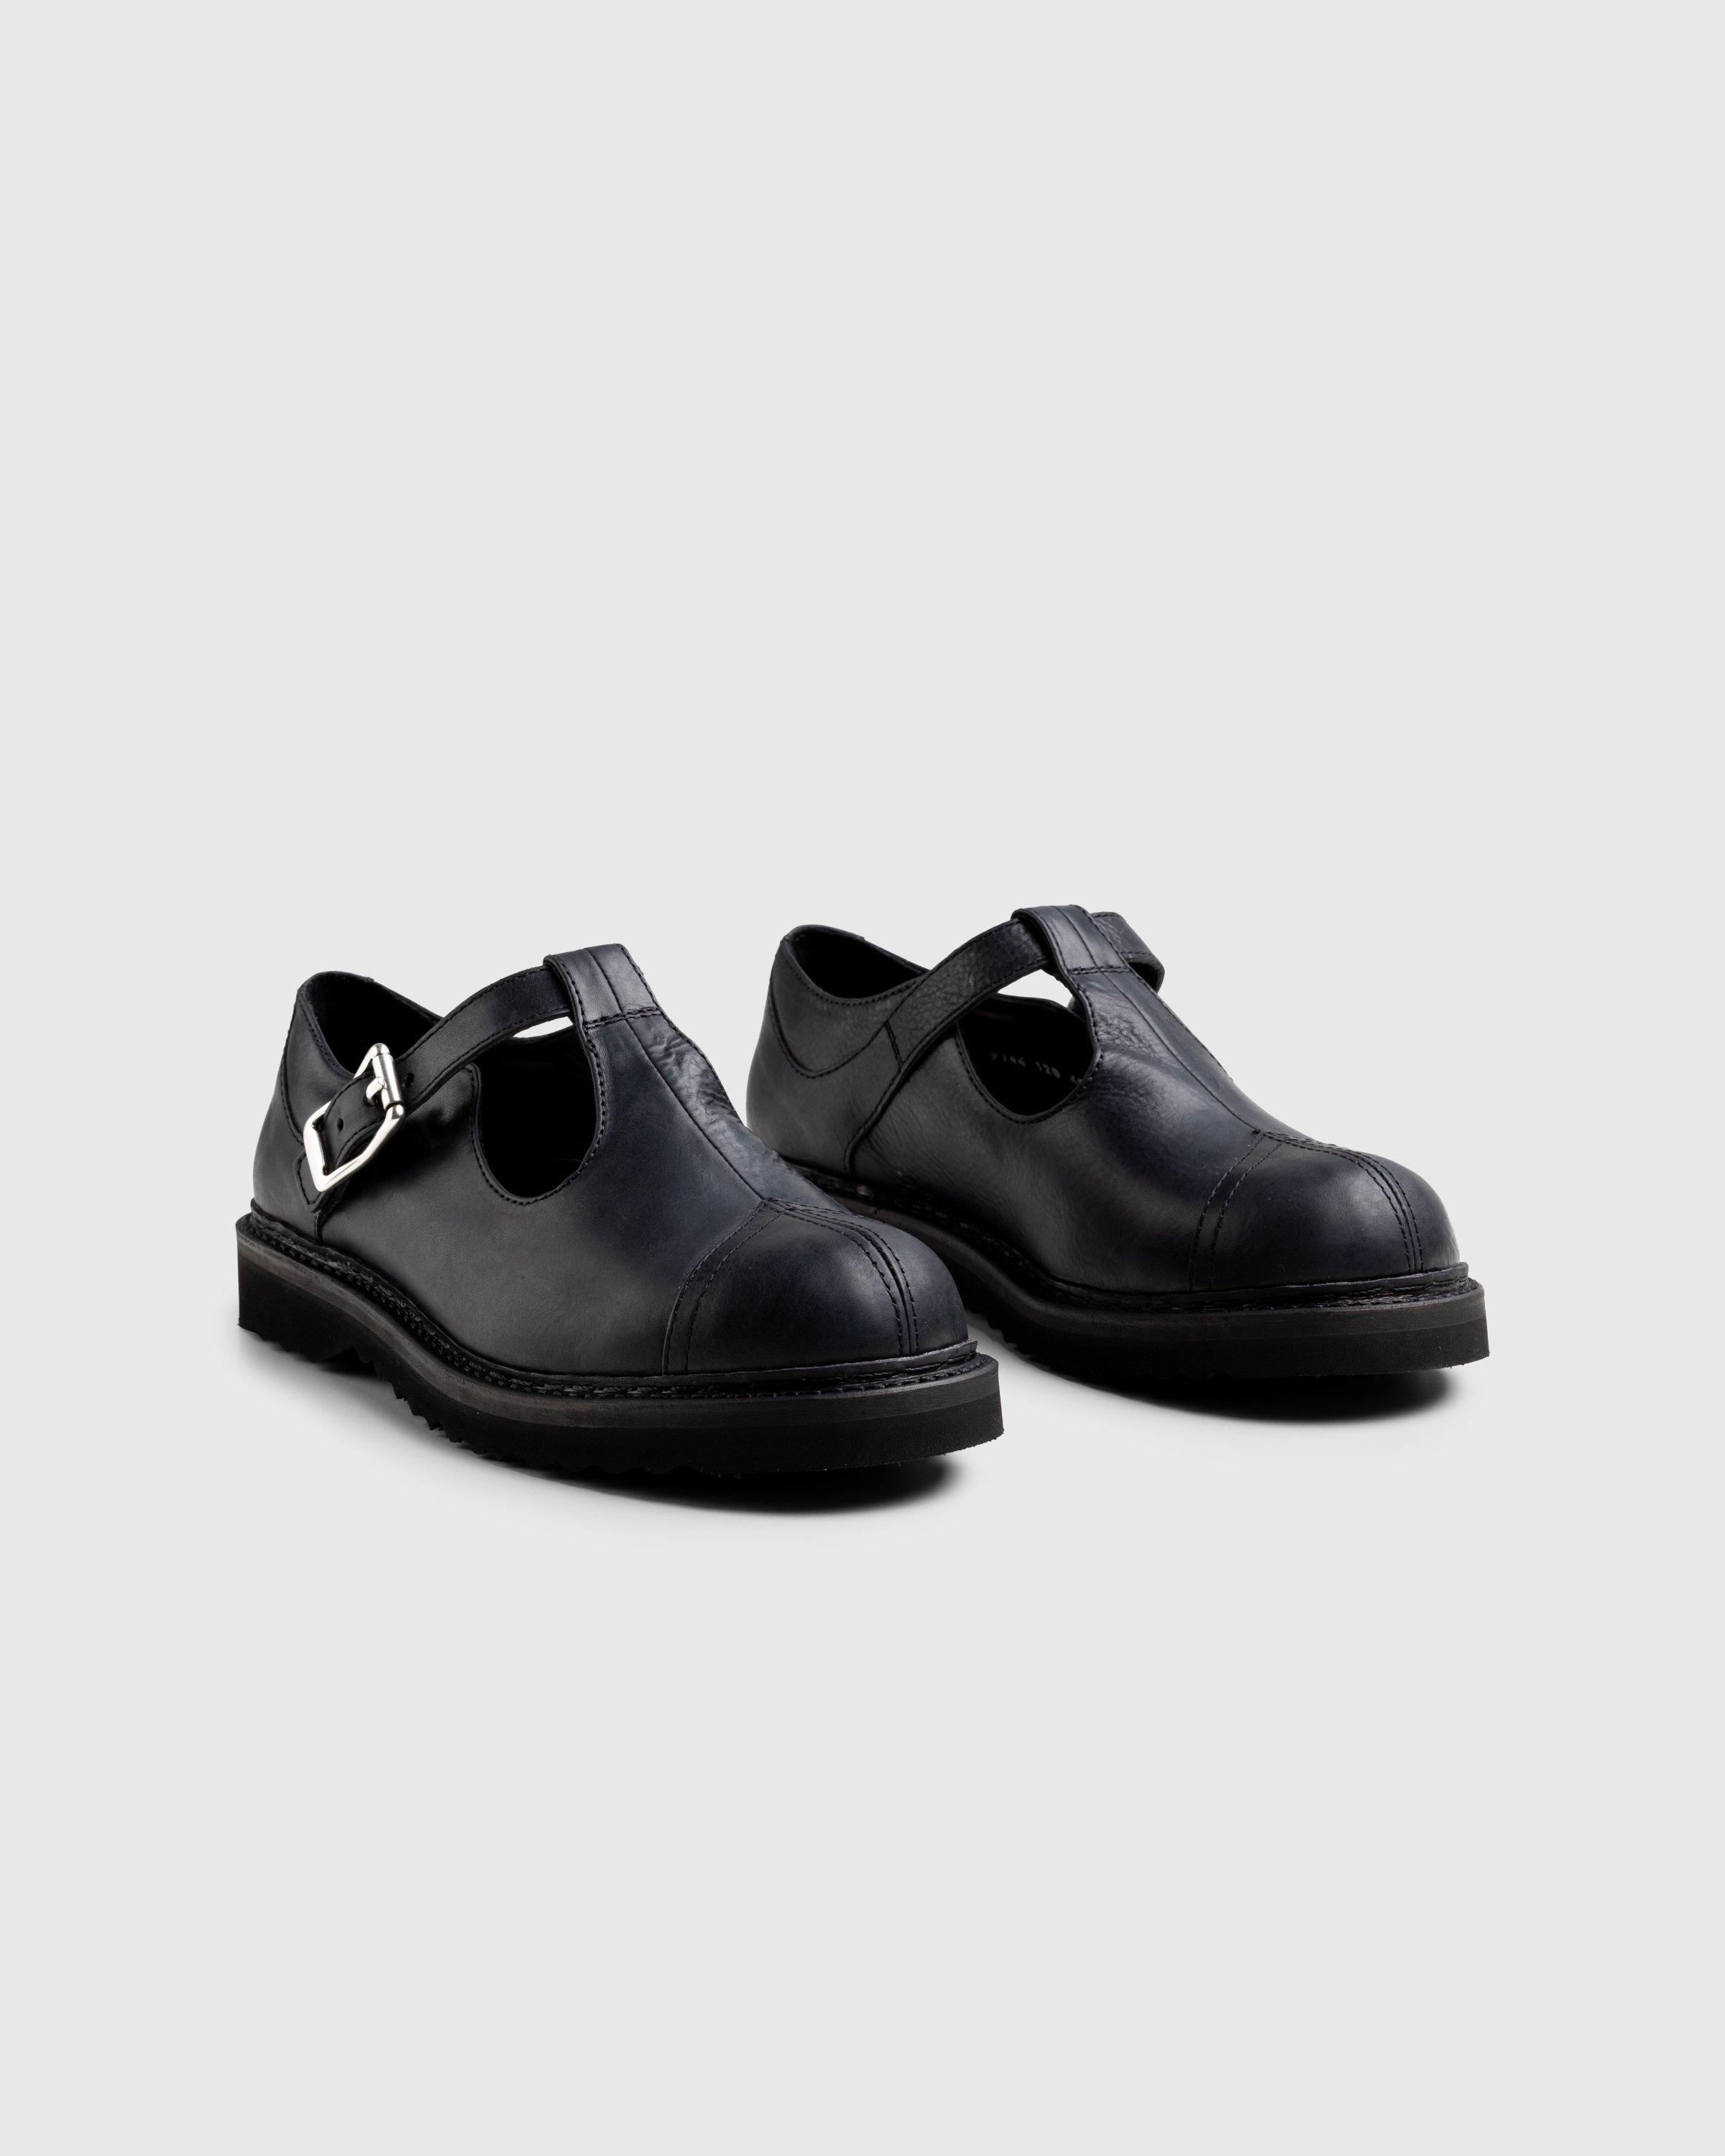 Our Legacy - Camden Shoe Car Tire Black Leather - Footwear - Black - Image 3